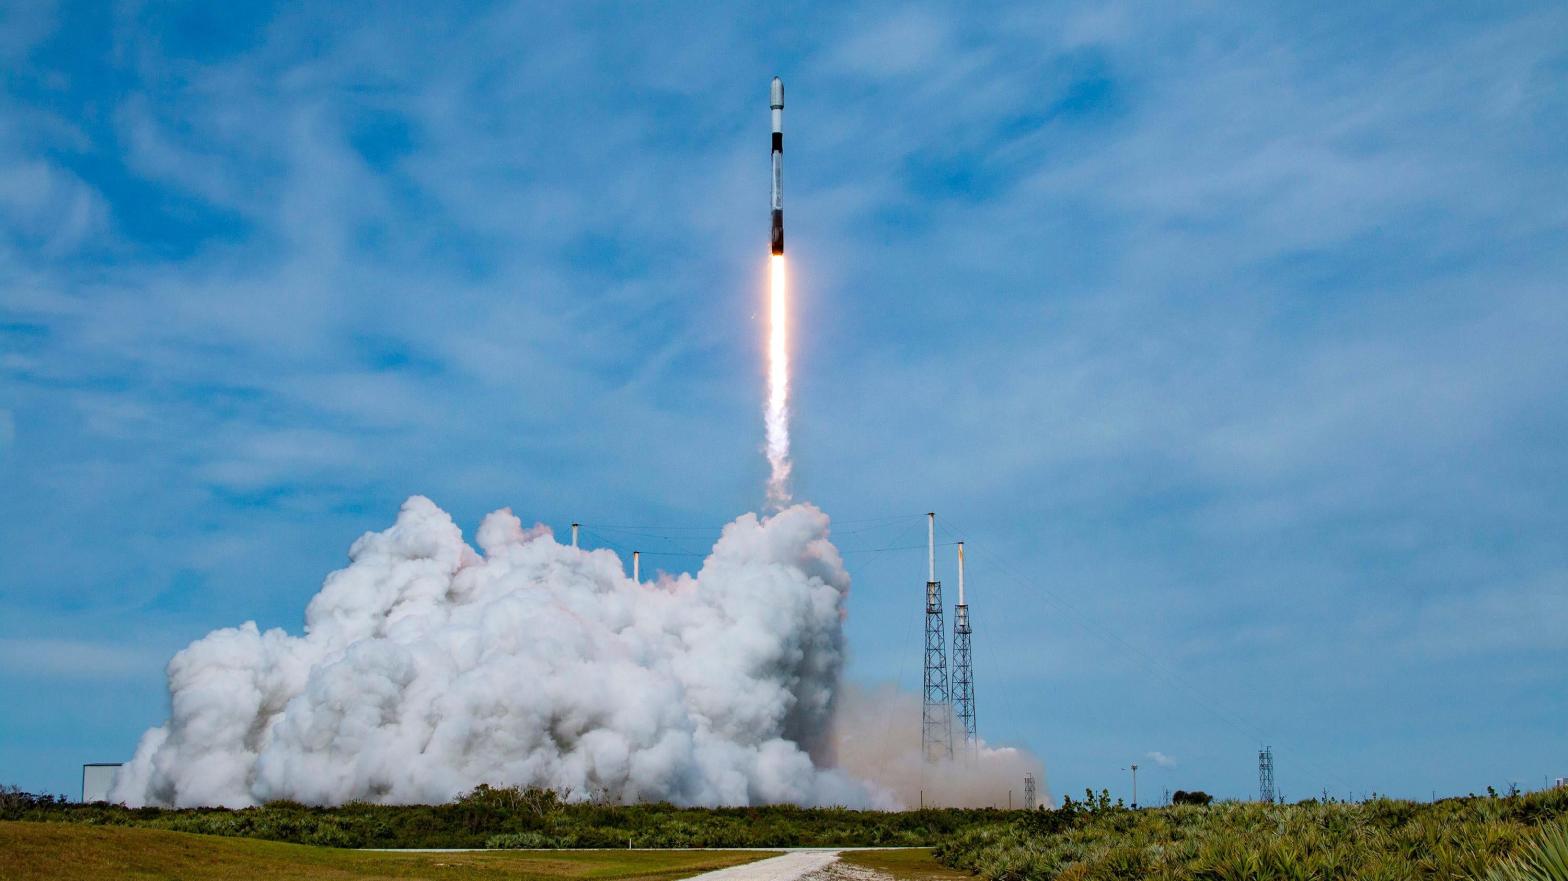 A Falcon 9 rocket launched on April 19, 2023 to deliver 21 Starlink V2 satellites. (Photo: SpaceX)